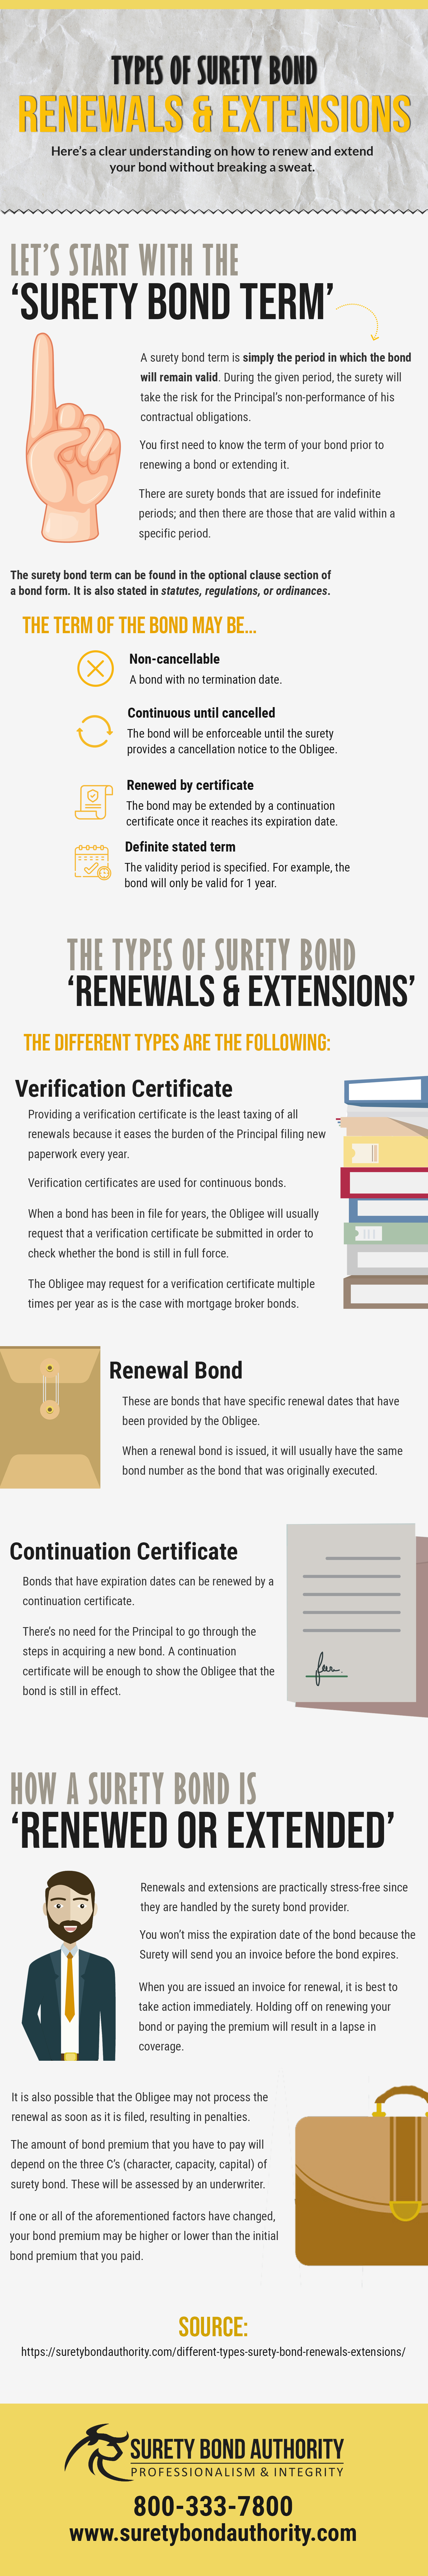 Surety Bond Renewals and Extensions Infographic